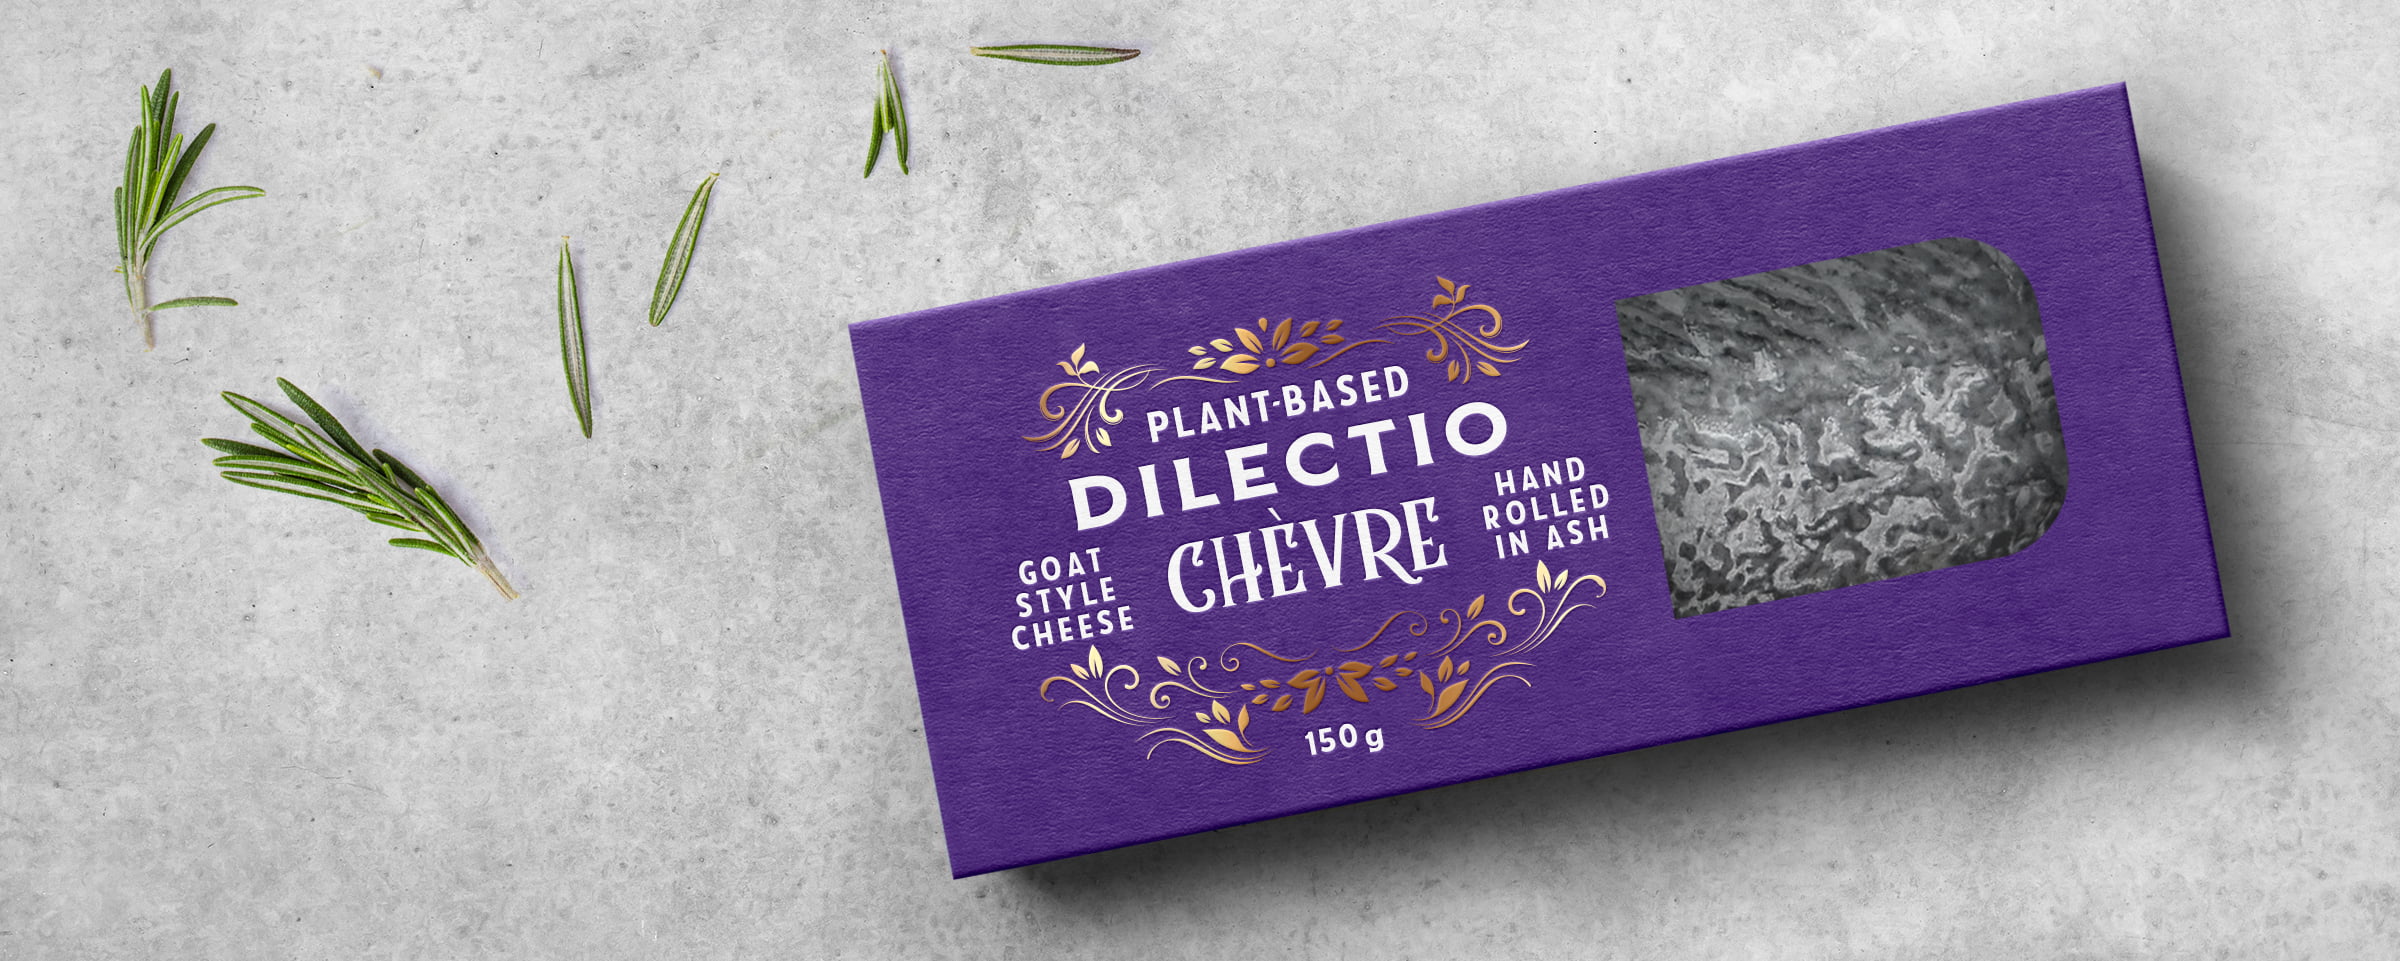 package-design-cheese-dilectio-gold-ash-goat-rosemary-newtown-design